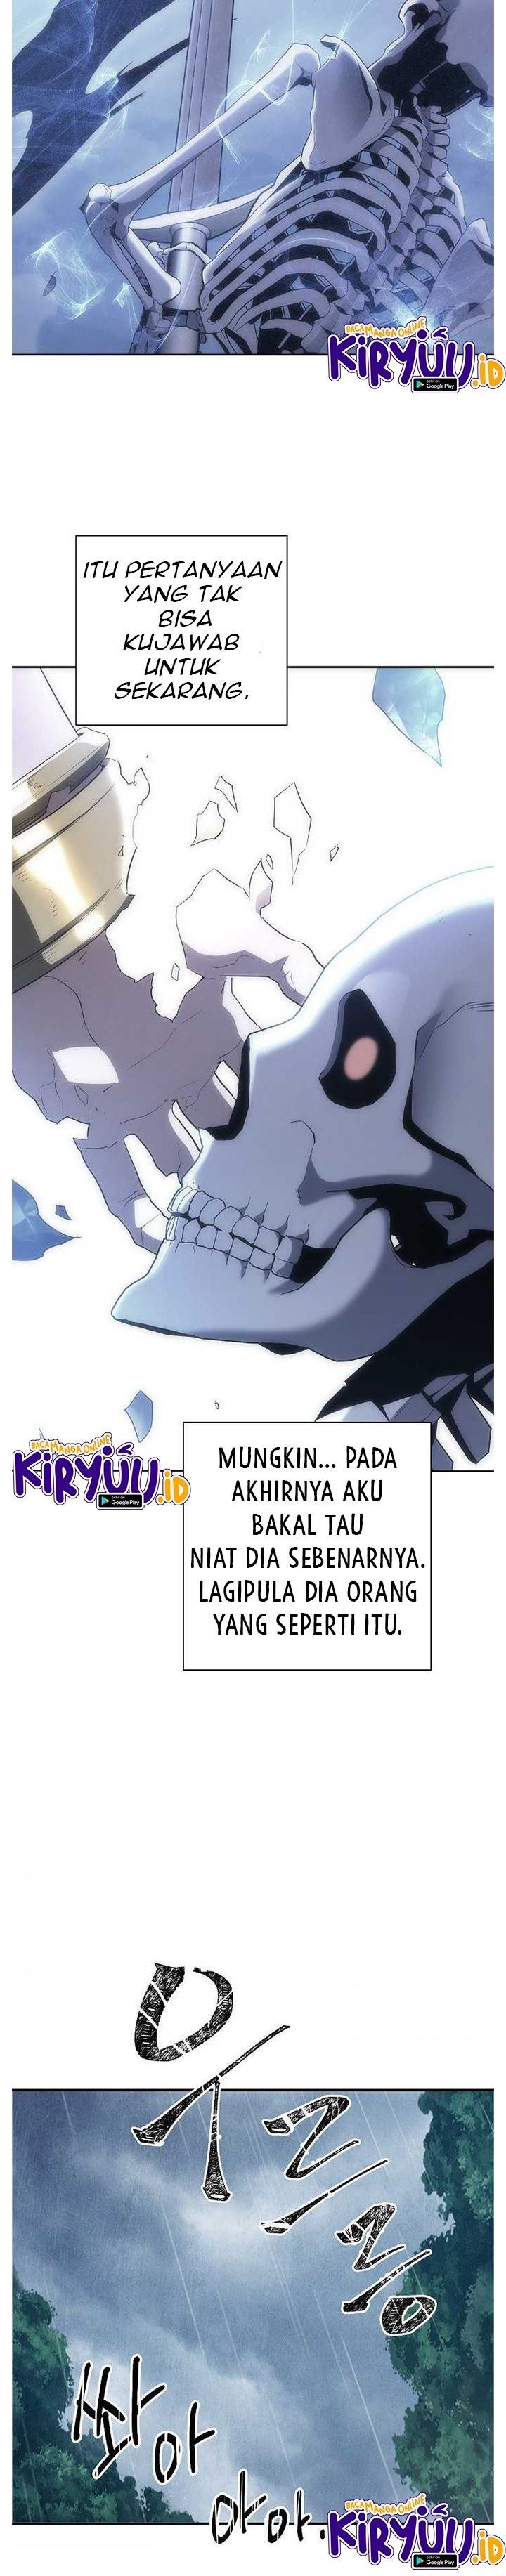 Skeleton Soldier Couldn’t Protect the Dungeon Chapter 141